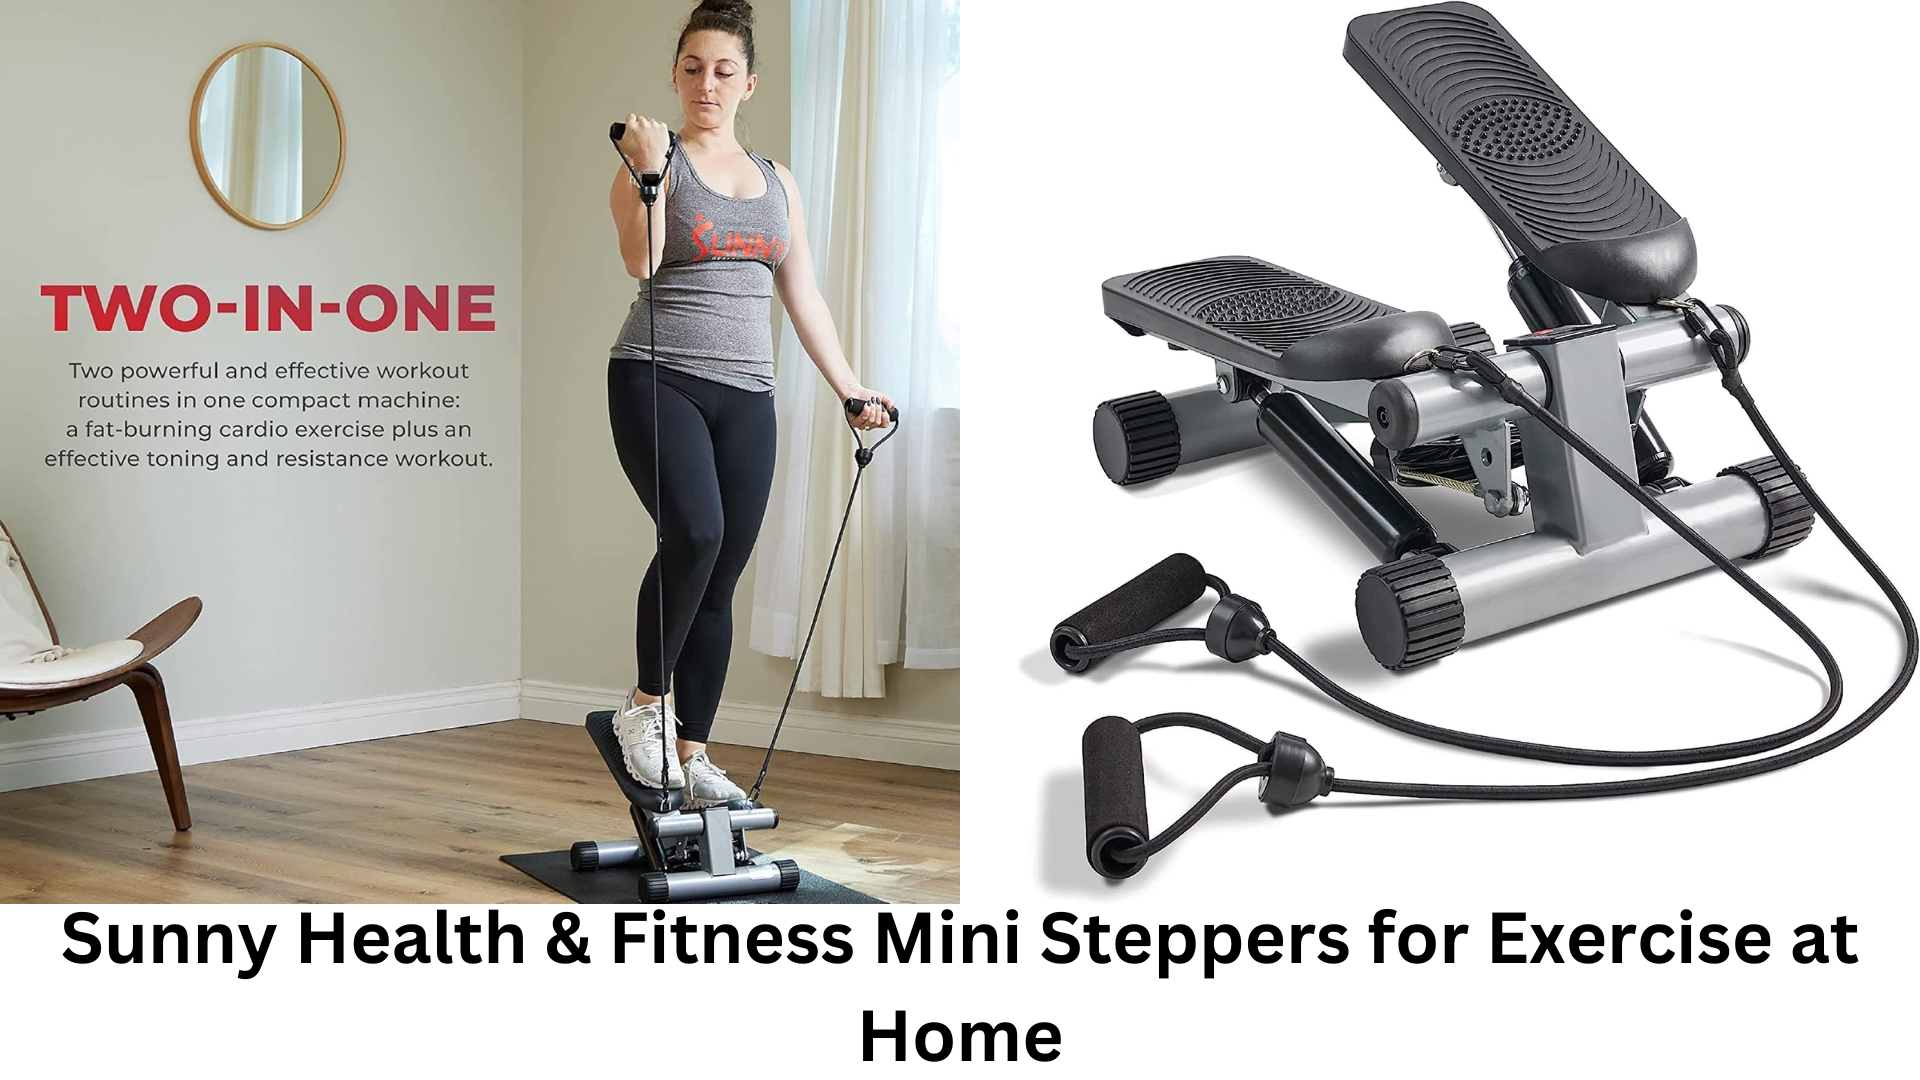 Sunny Health & Fitness Mini Steppers for Exercise at Home